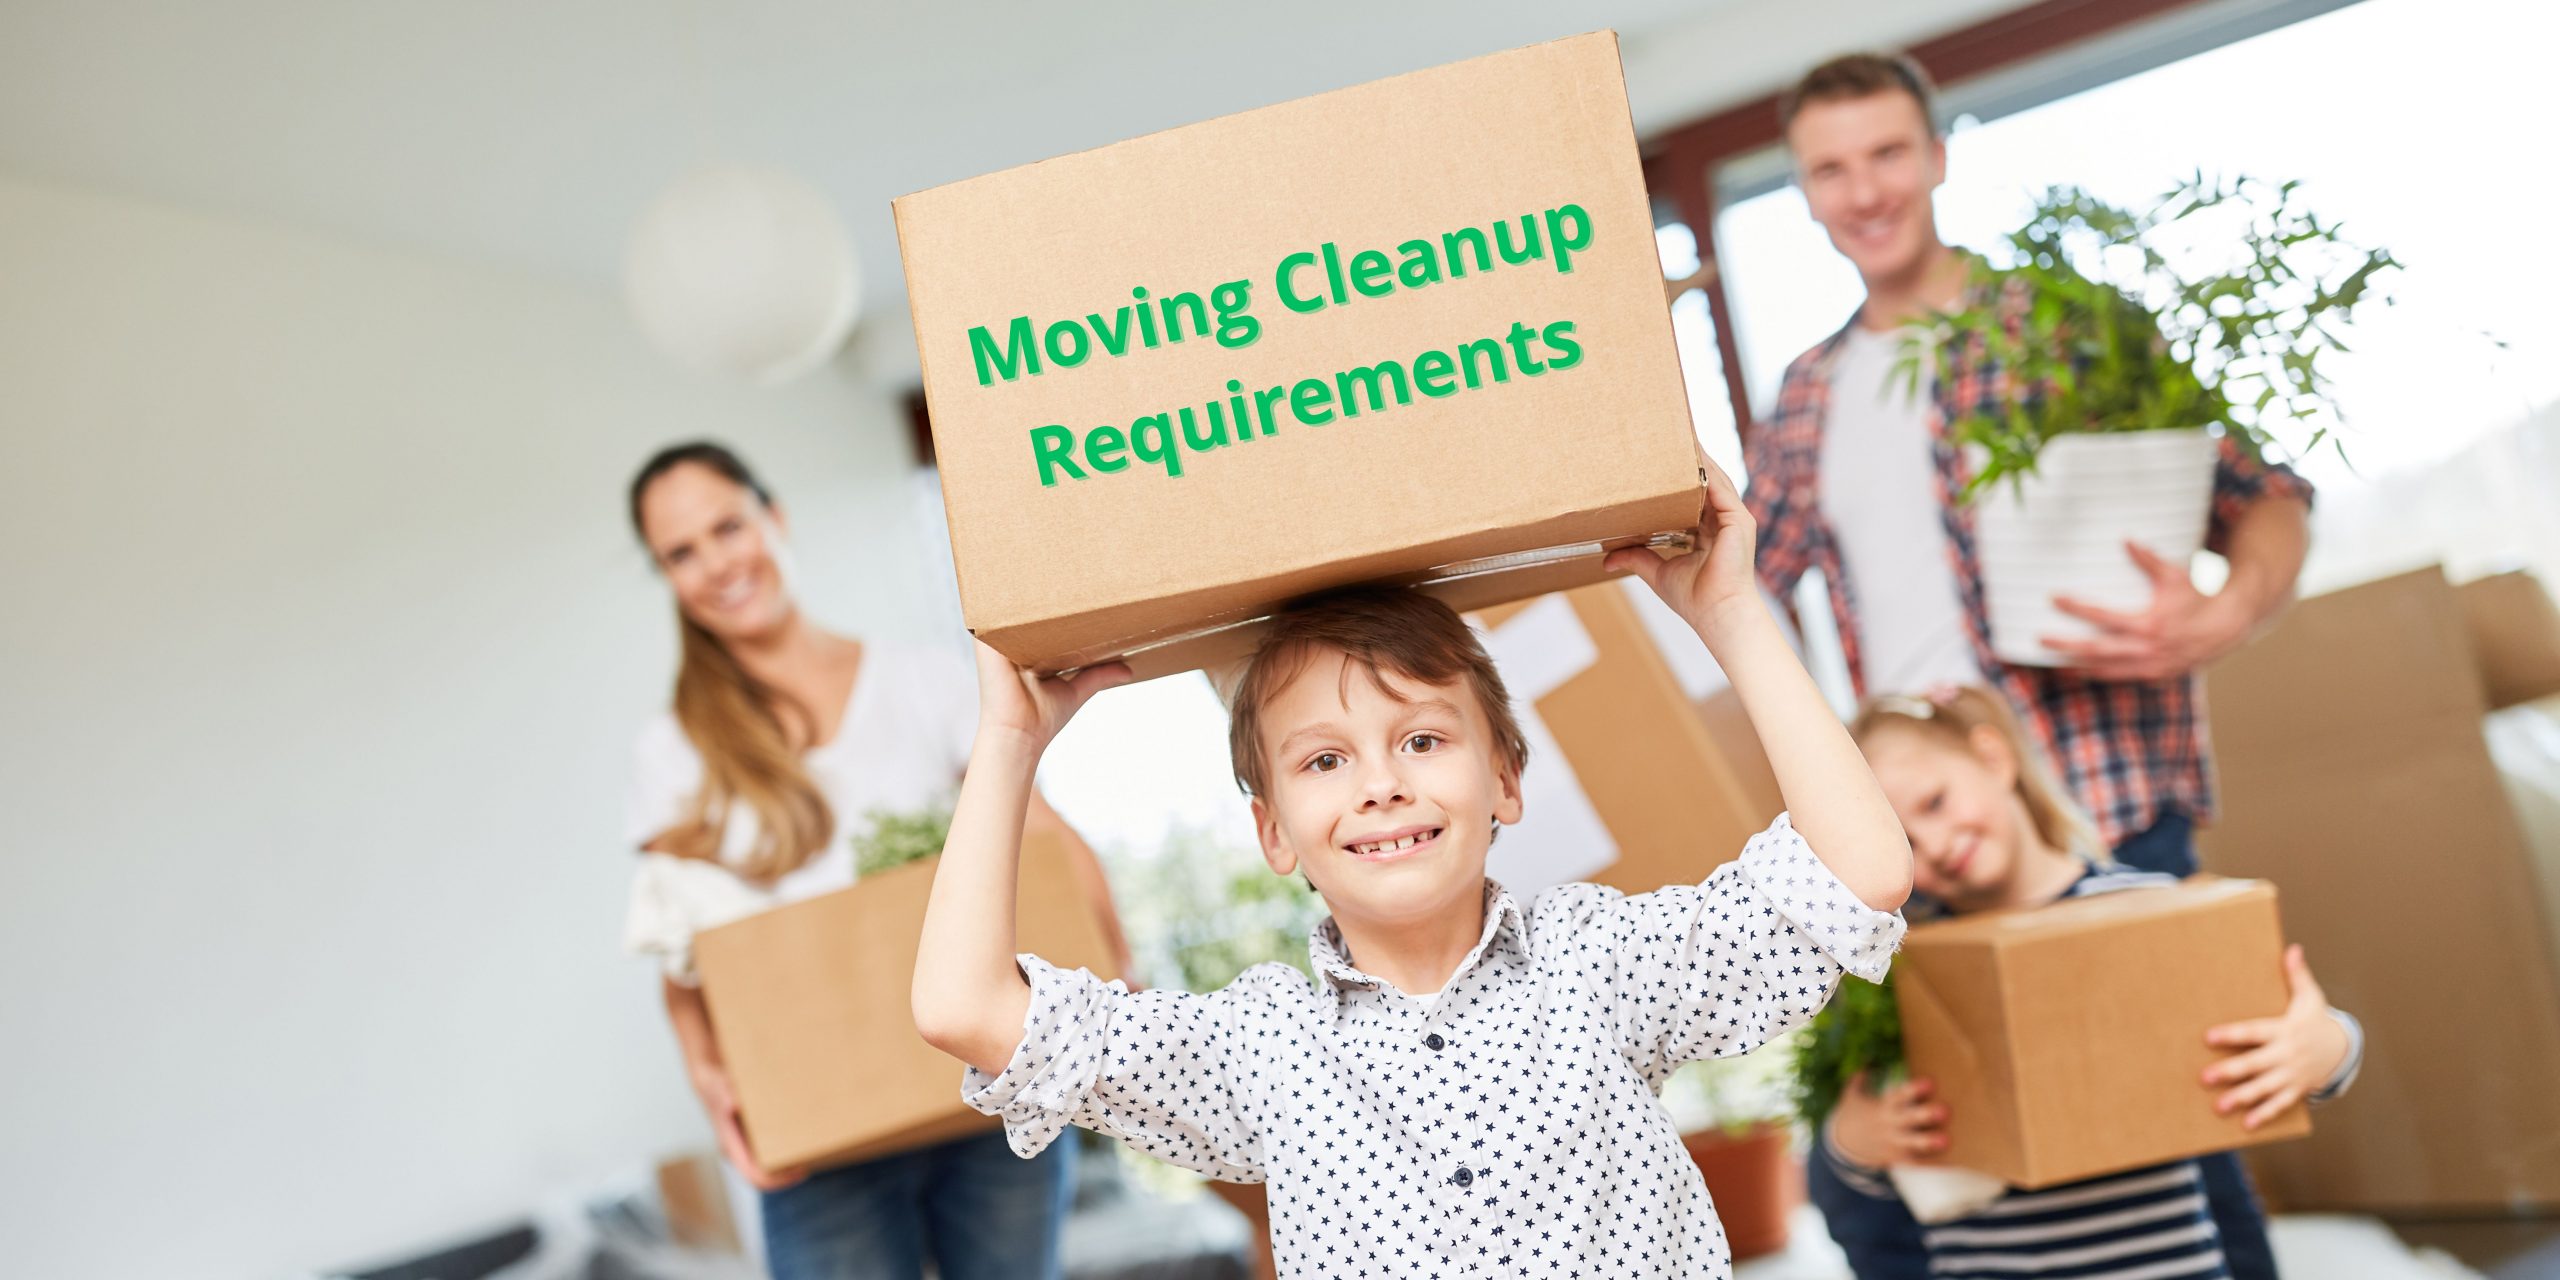 You are currently viewing Moving Cleanup Requirements